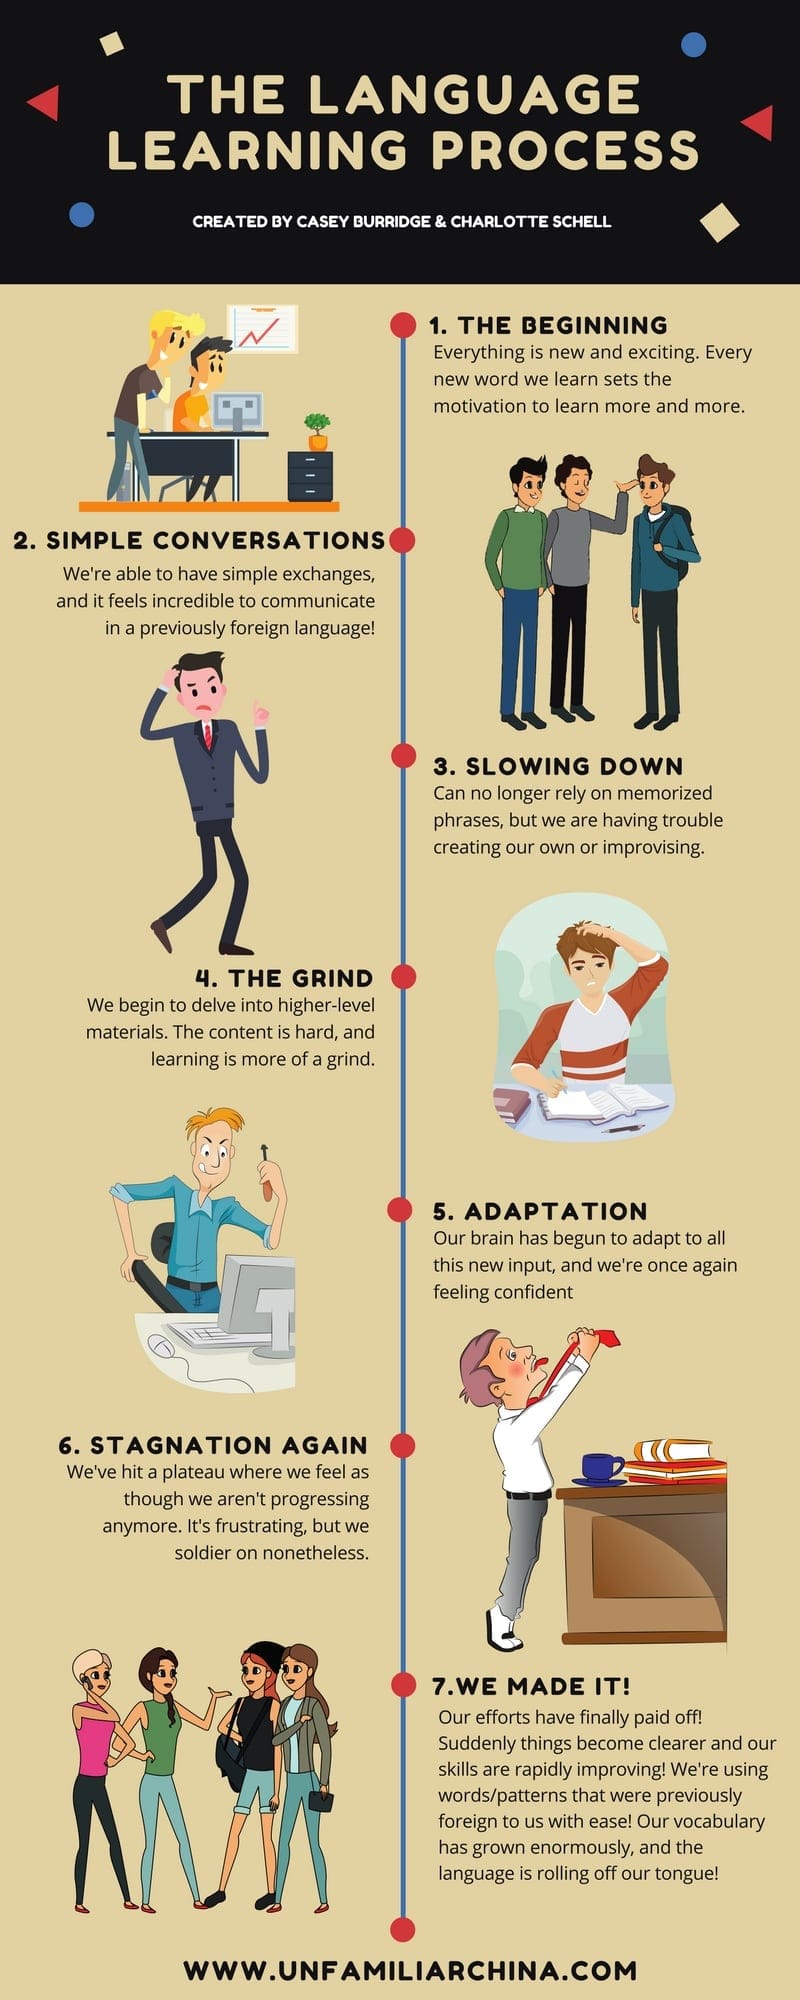 Infographic Illustrating the Seven-Step Language Learning Process